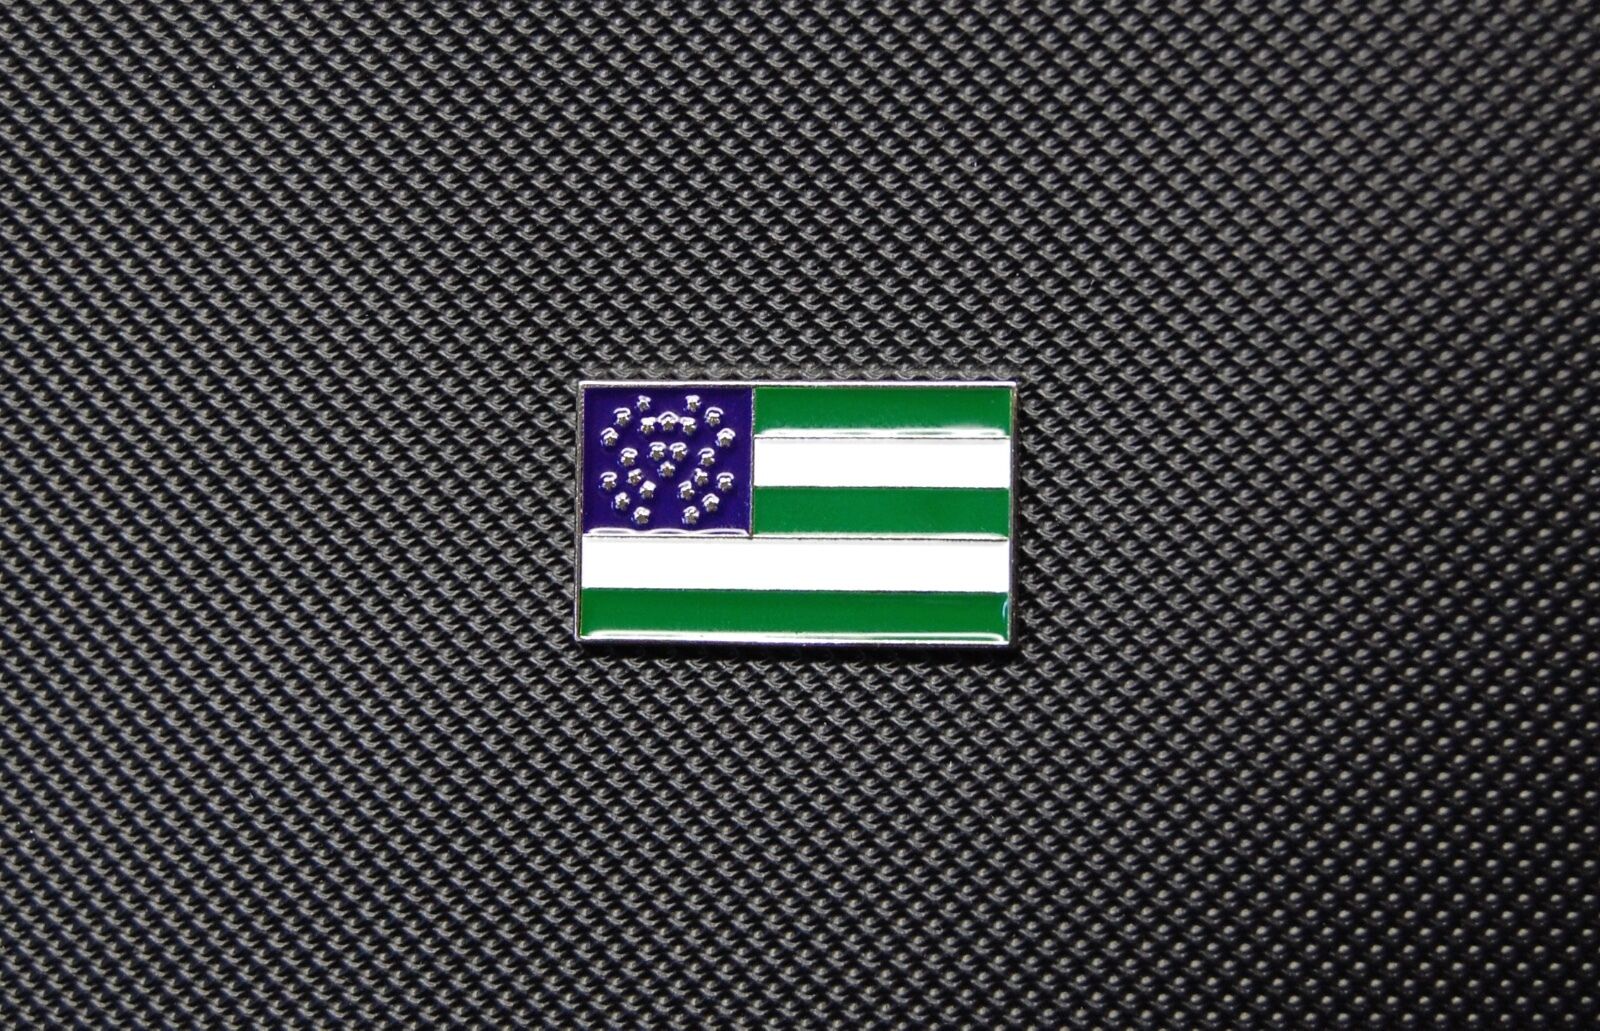 New York Police Department Flag Enamel Lapel Pin Nypd New York's Finest